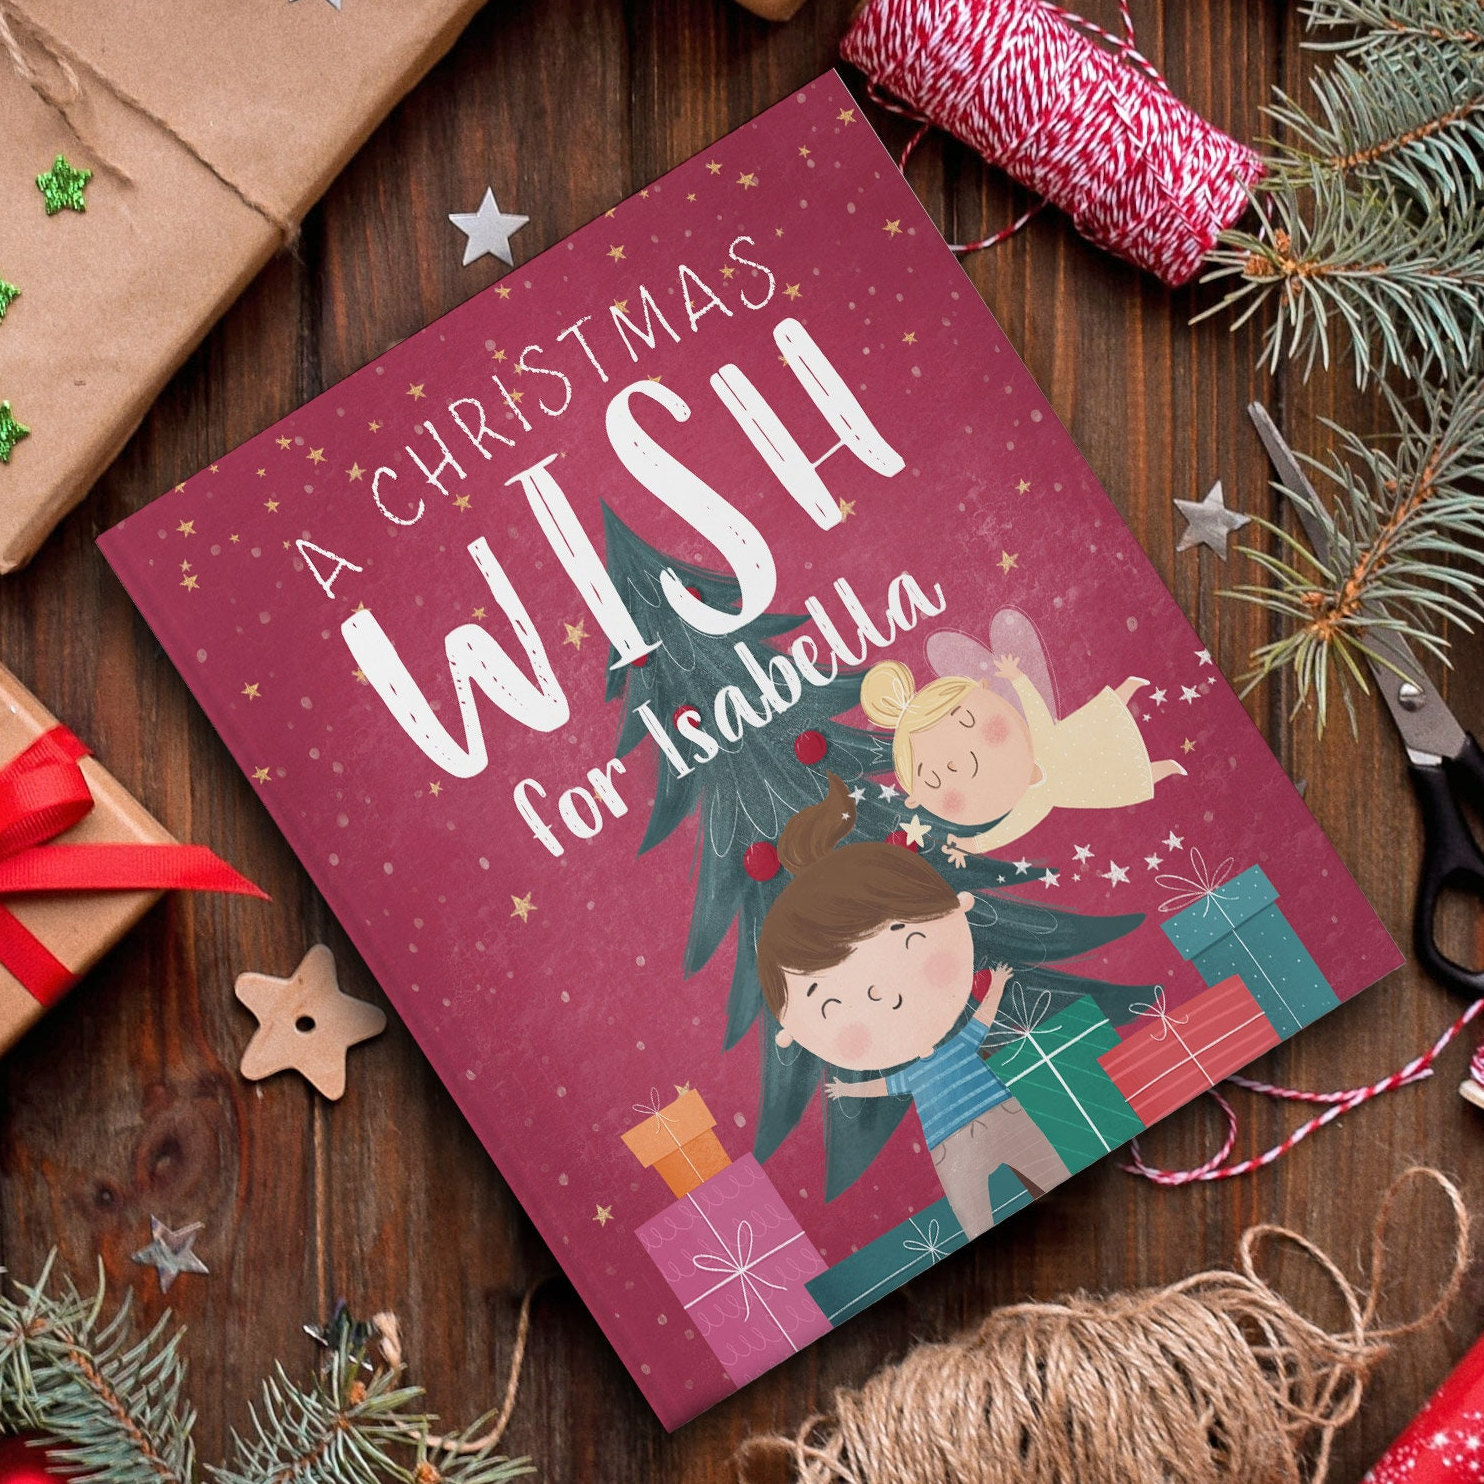 Personalized Books for Christmas!